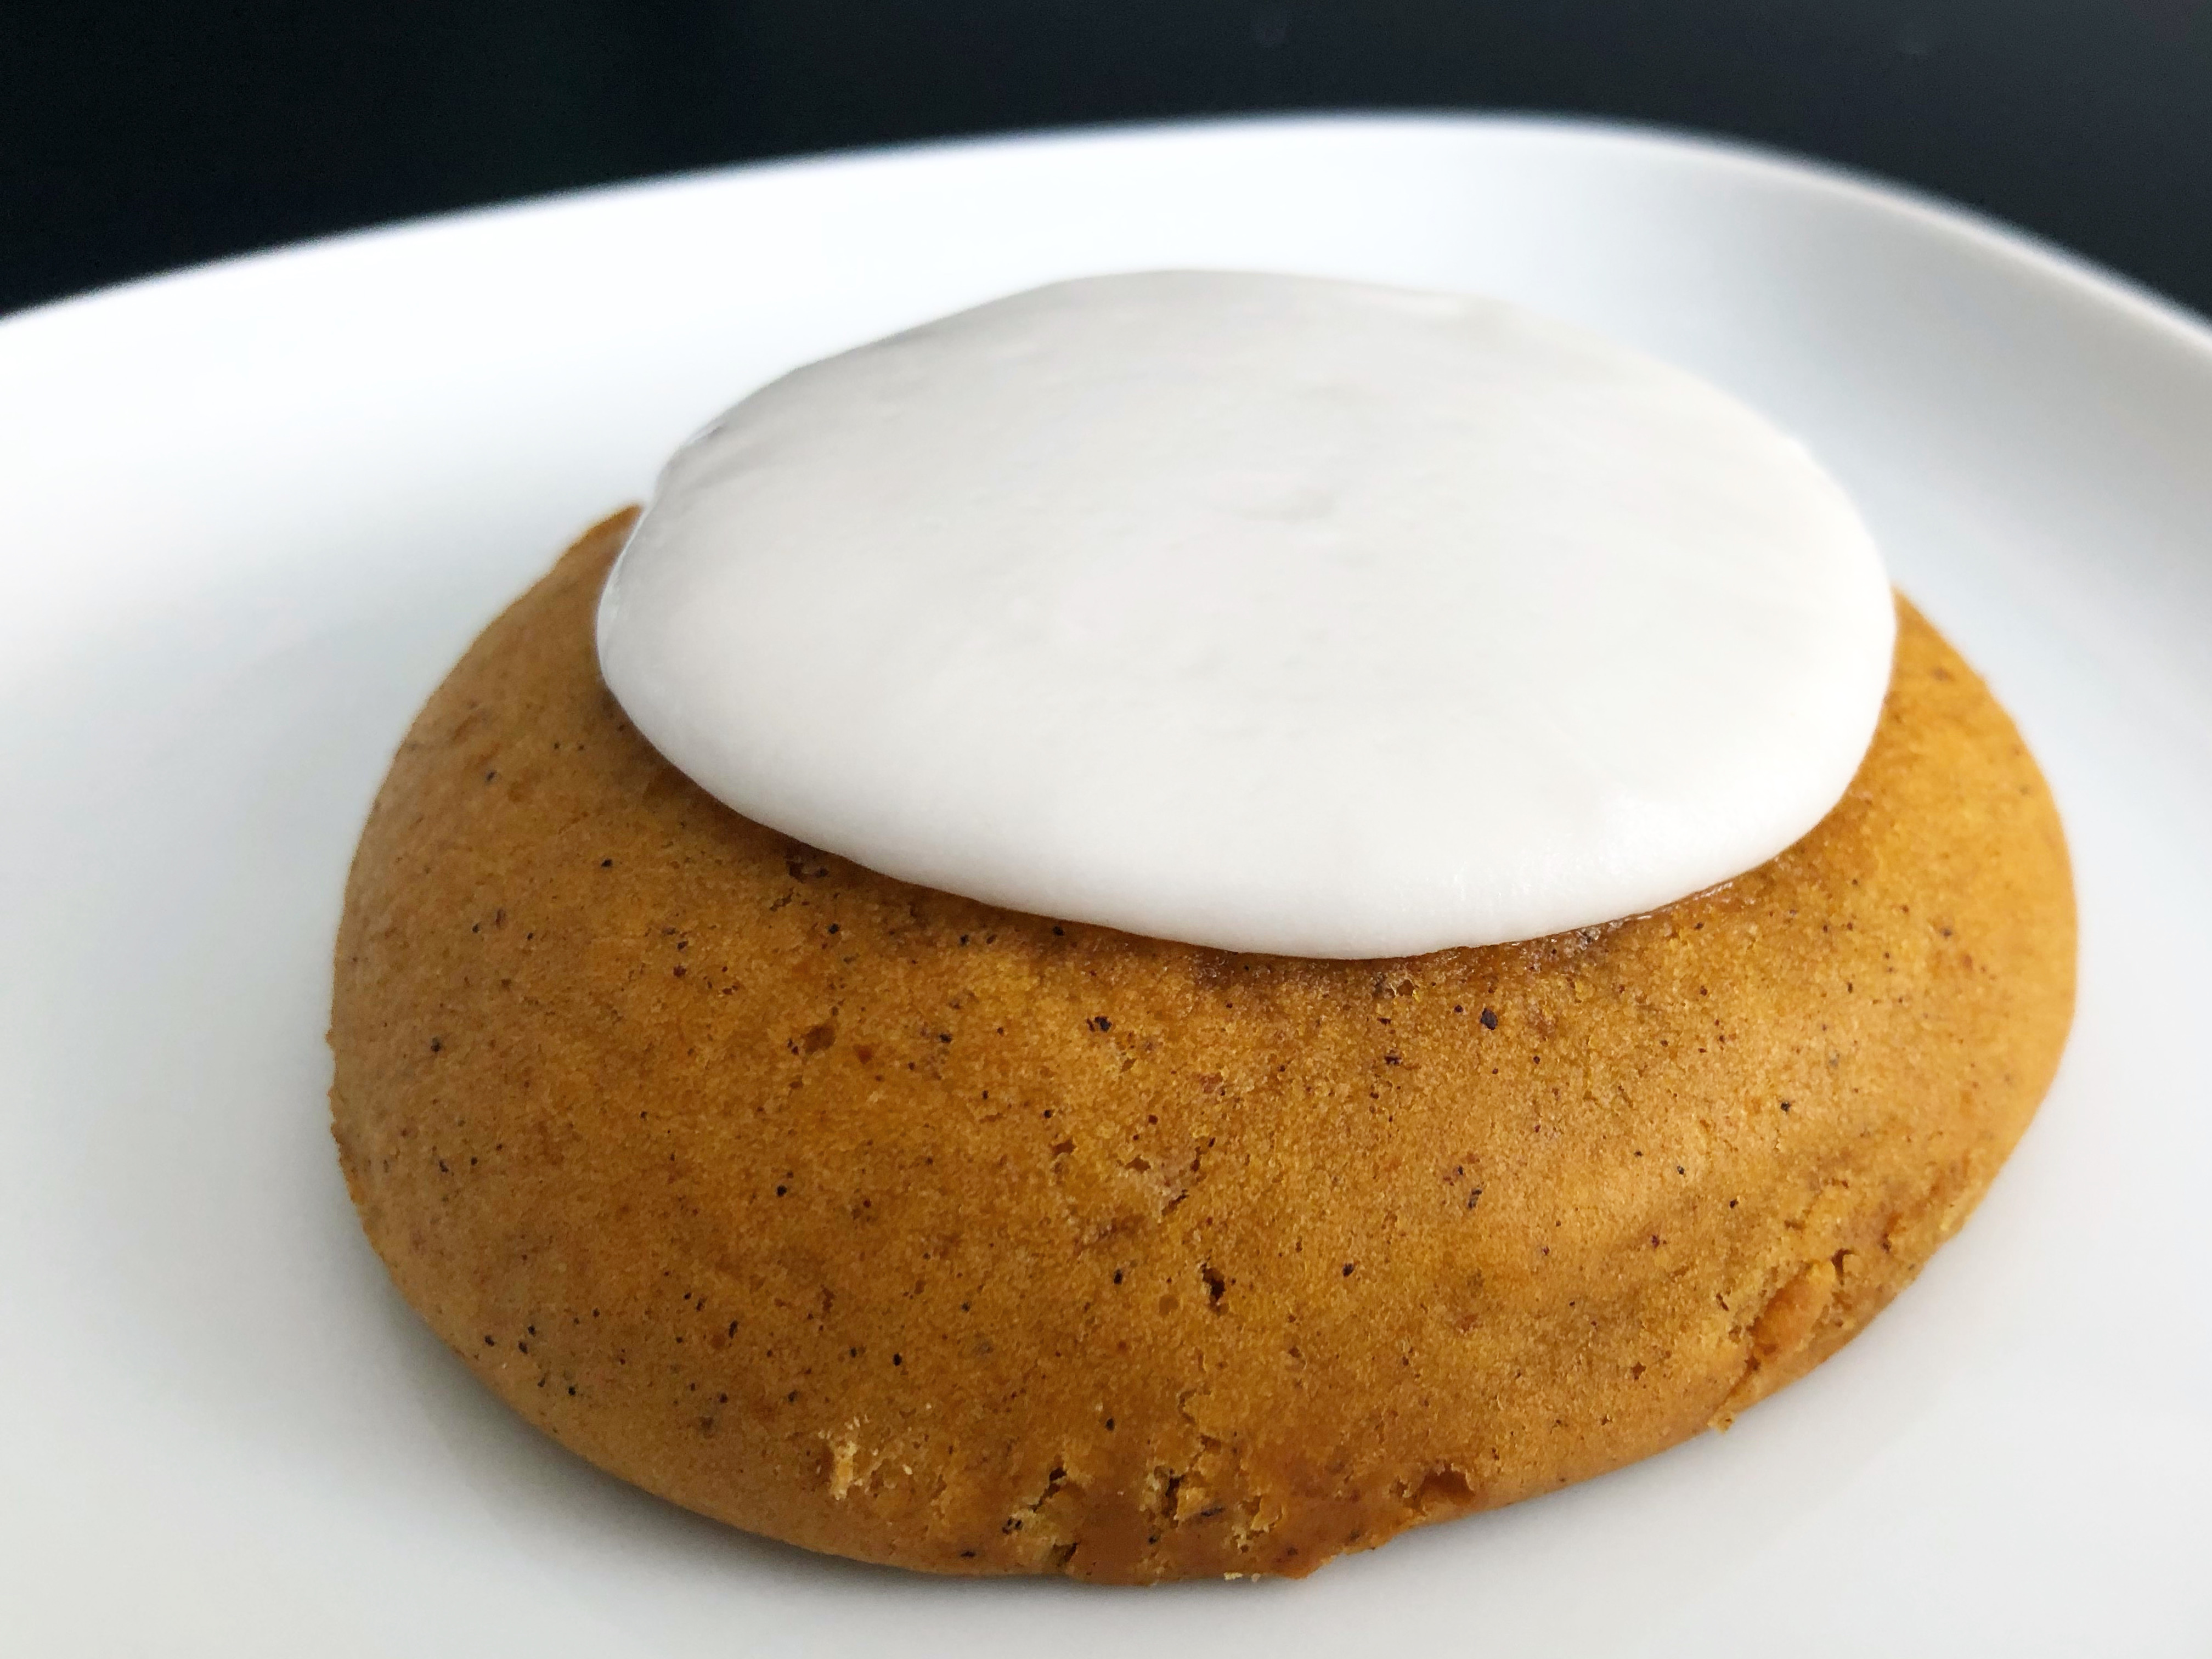 A pumpkin cookie from Art Mart with a yellow-brown cookie base and a white circle of icing sits on a white plate. Photo by Alyssa Buckley.